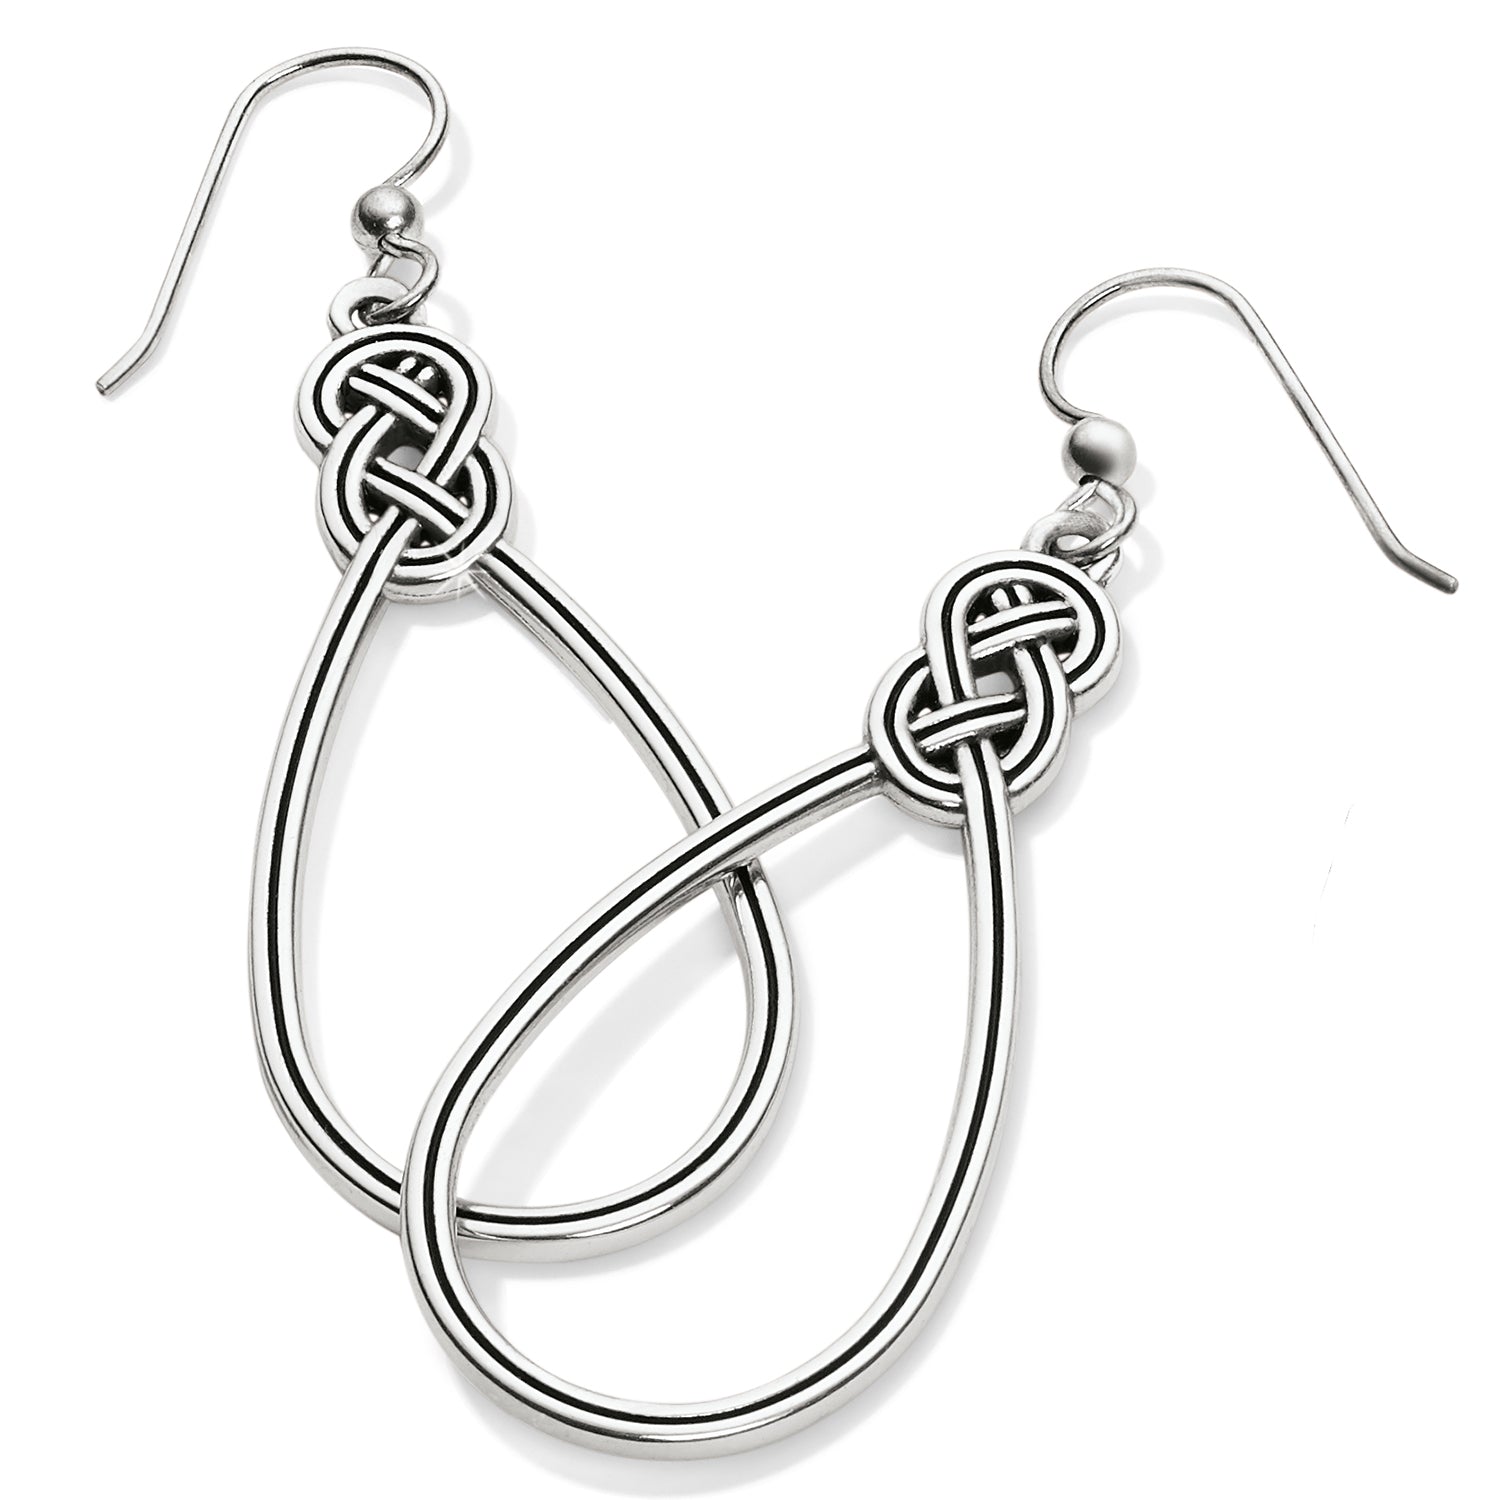 Interlok French Wire Earrings by Brighton features Celtic interlocking knot signifying love and life. Shop at The Painted Cottage in Edgewater, MD.